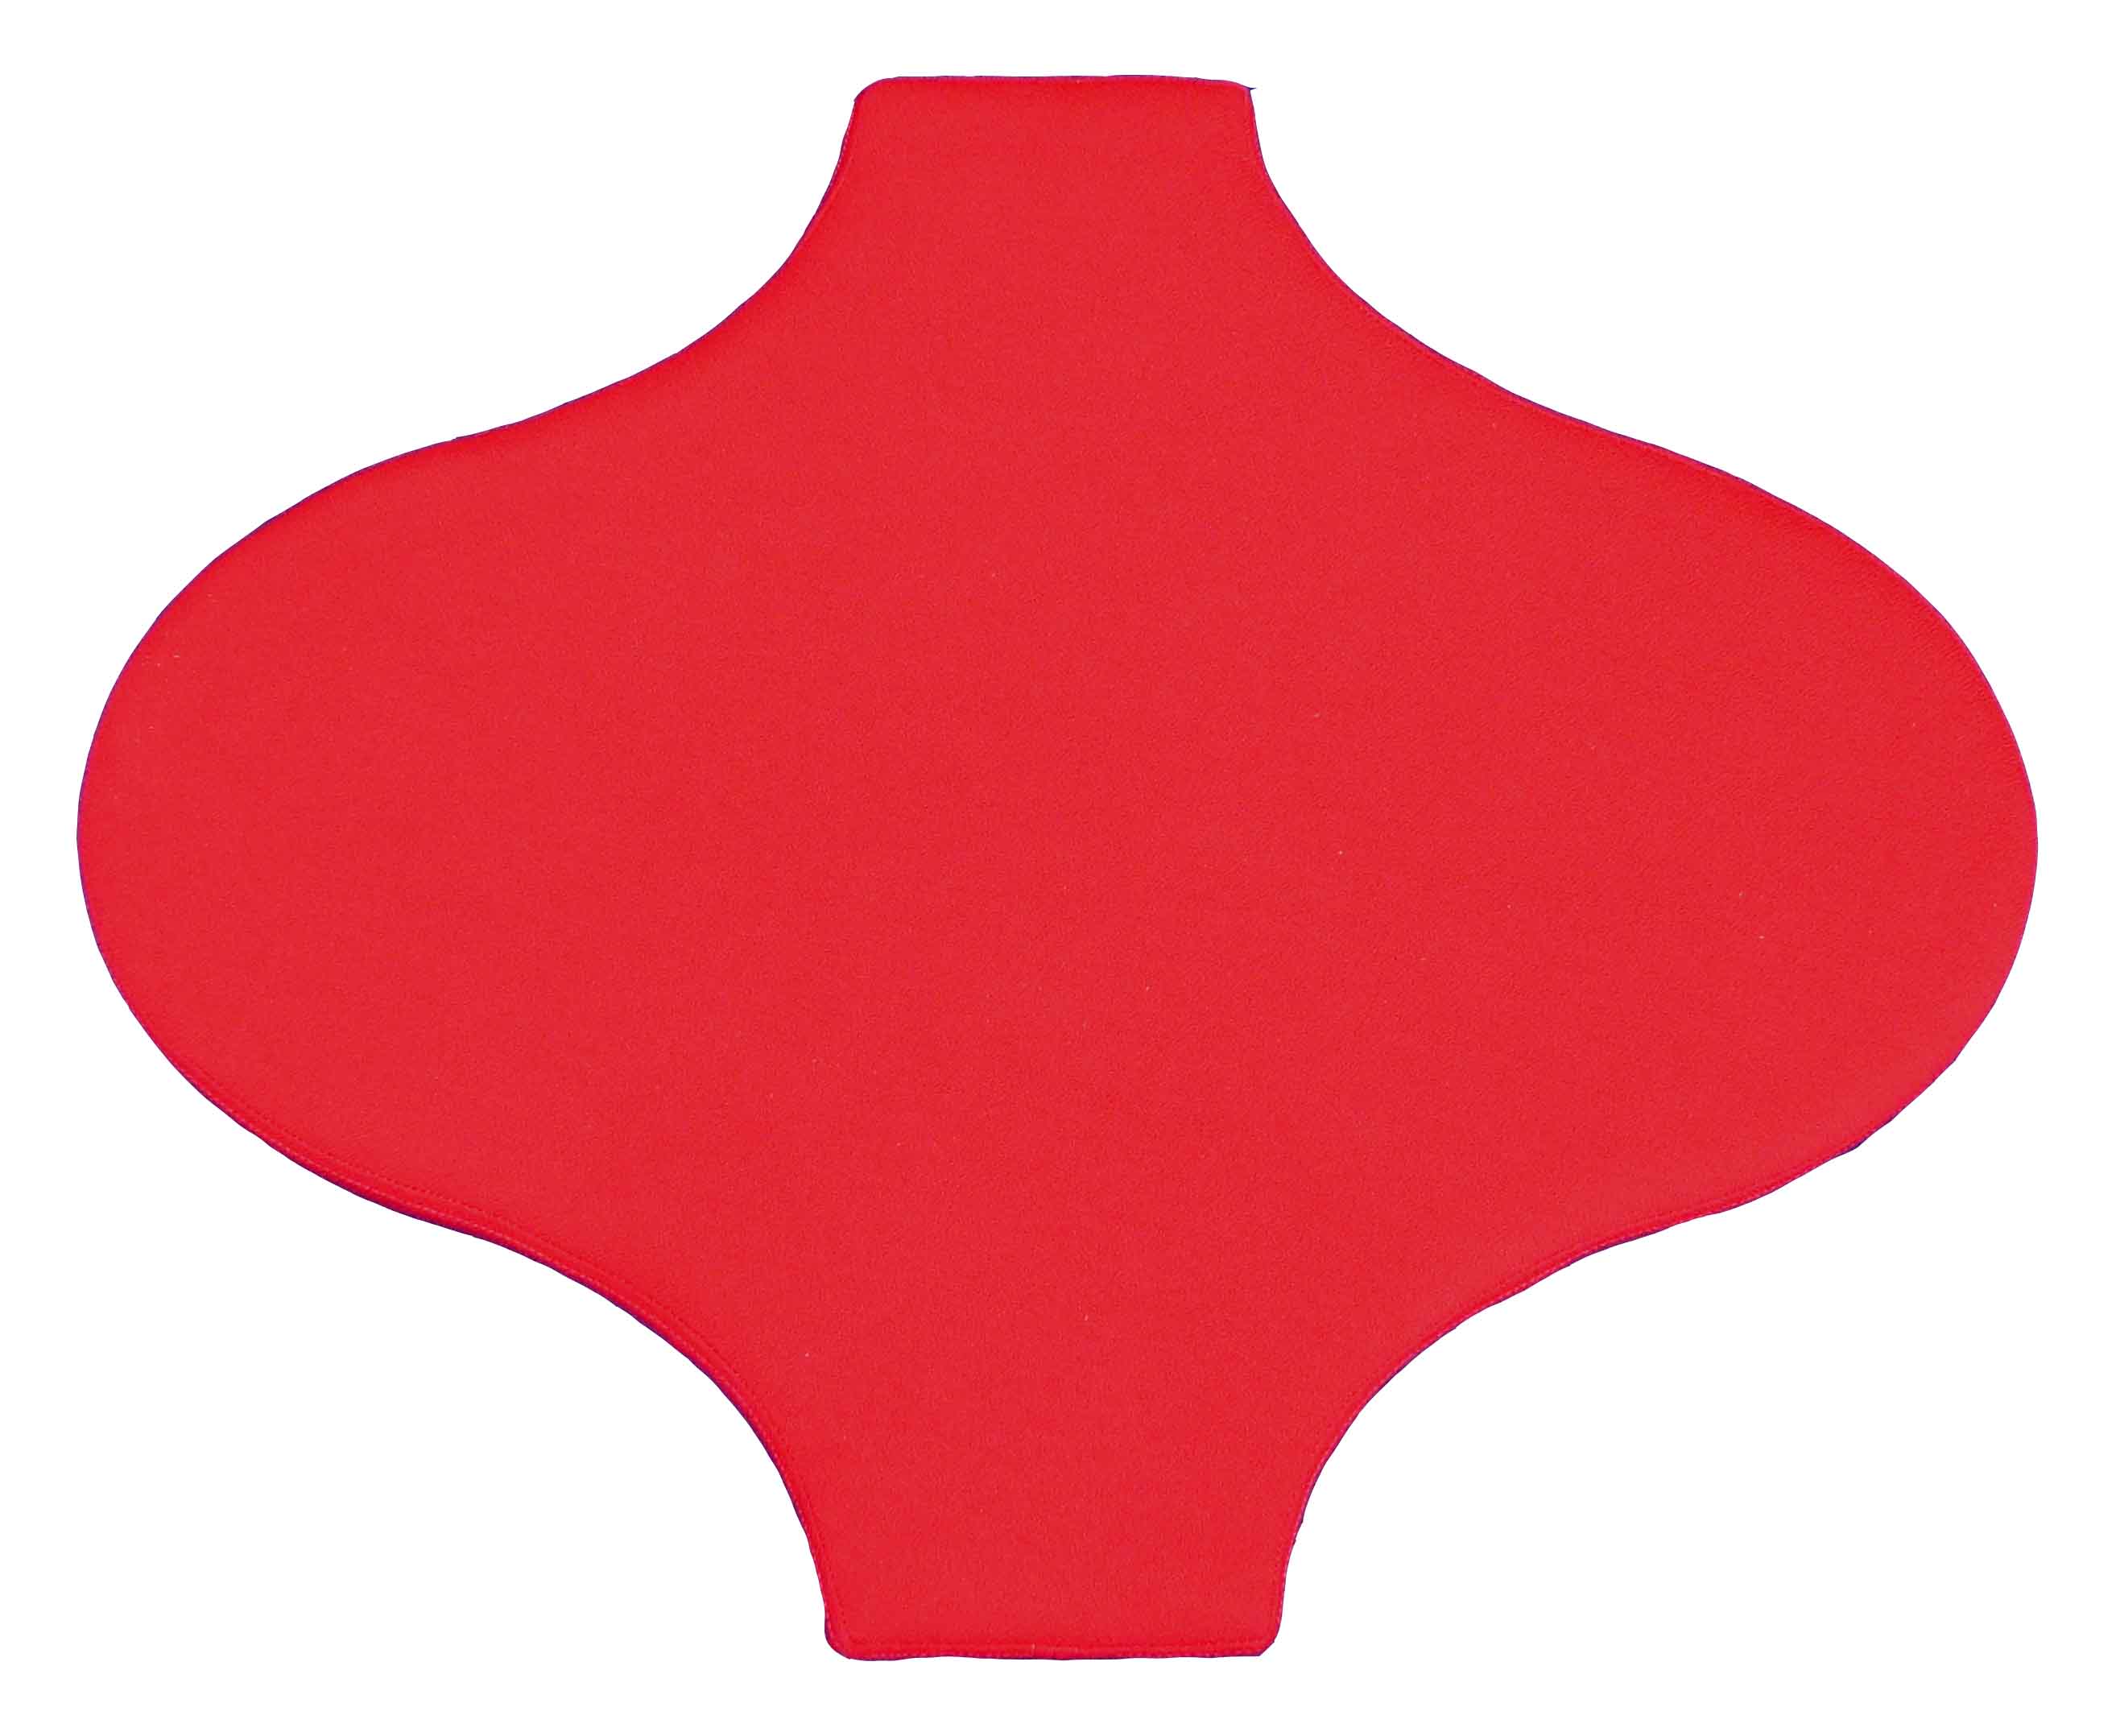 Zellige sound absorbing panel in red from the Emotive range